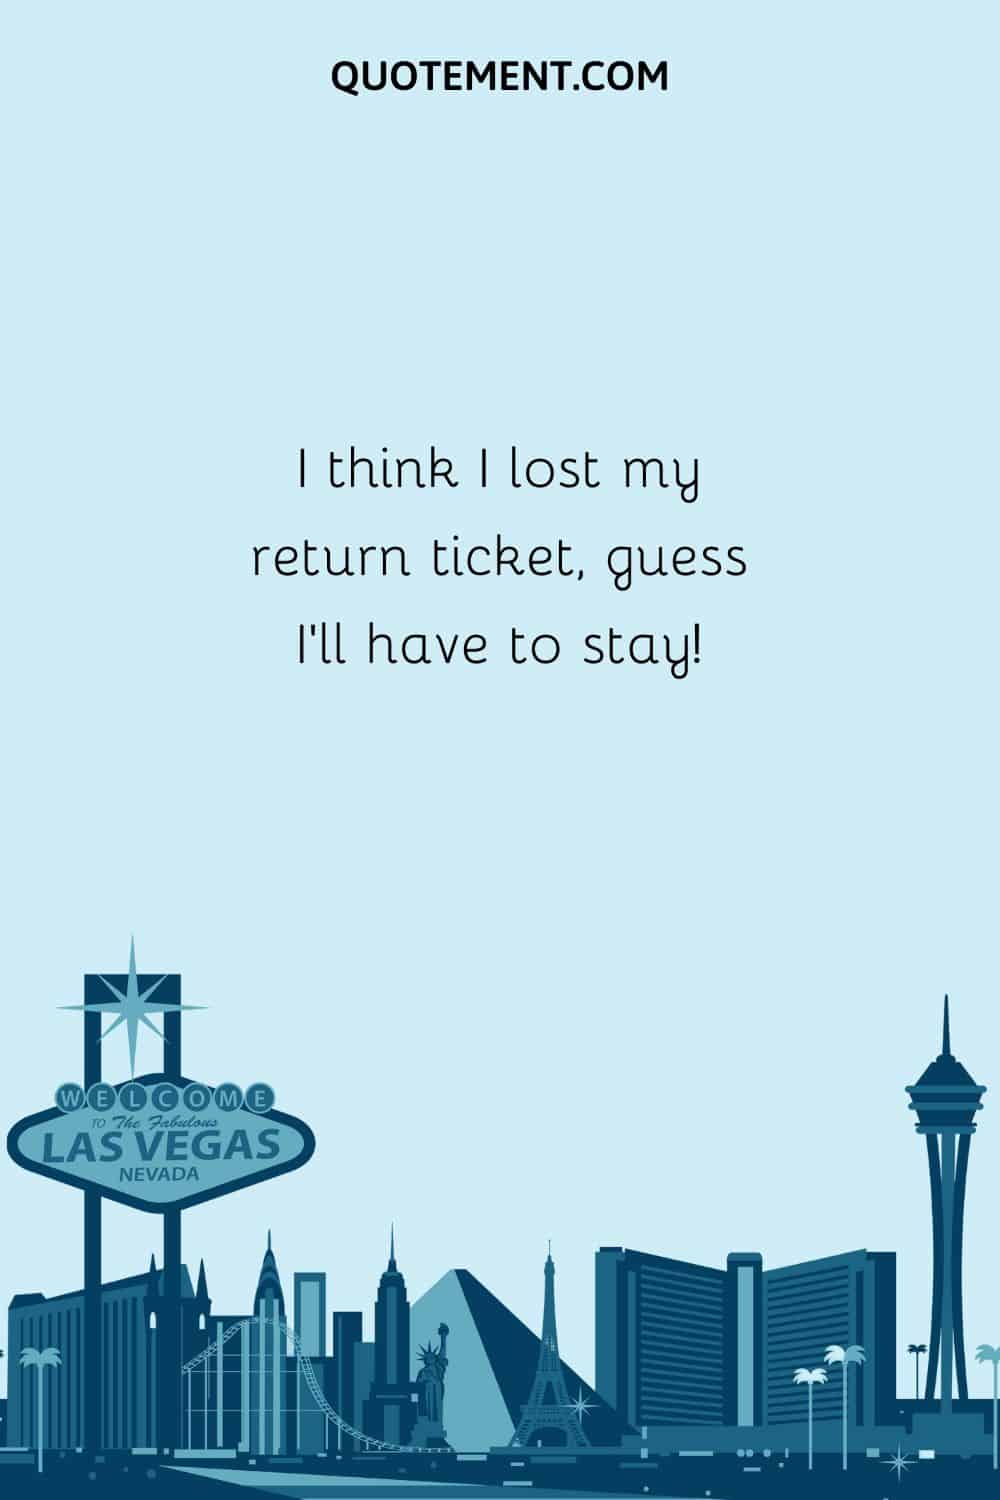 I think I lost my return ticket, guess I’ll have to stay!